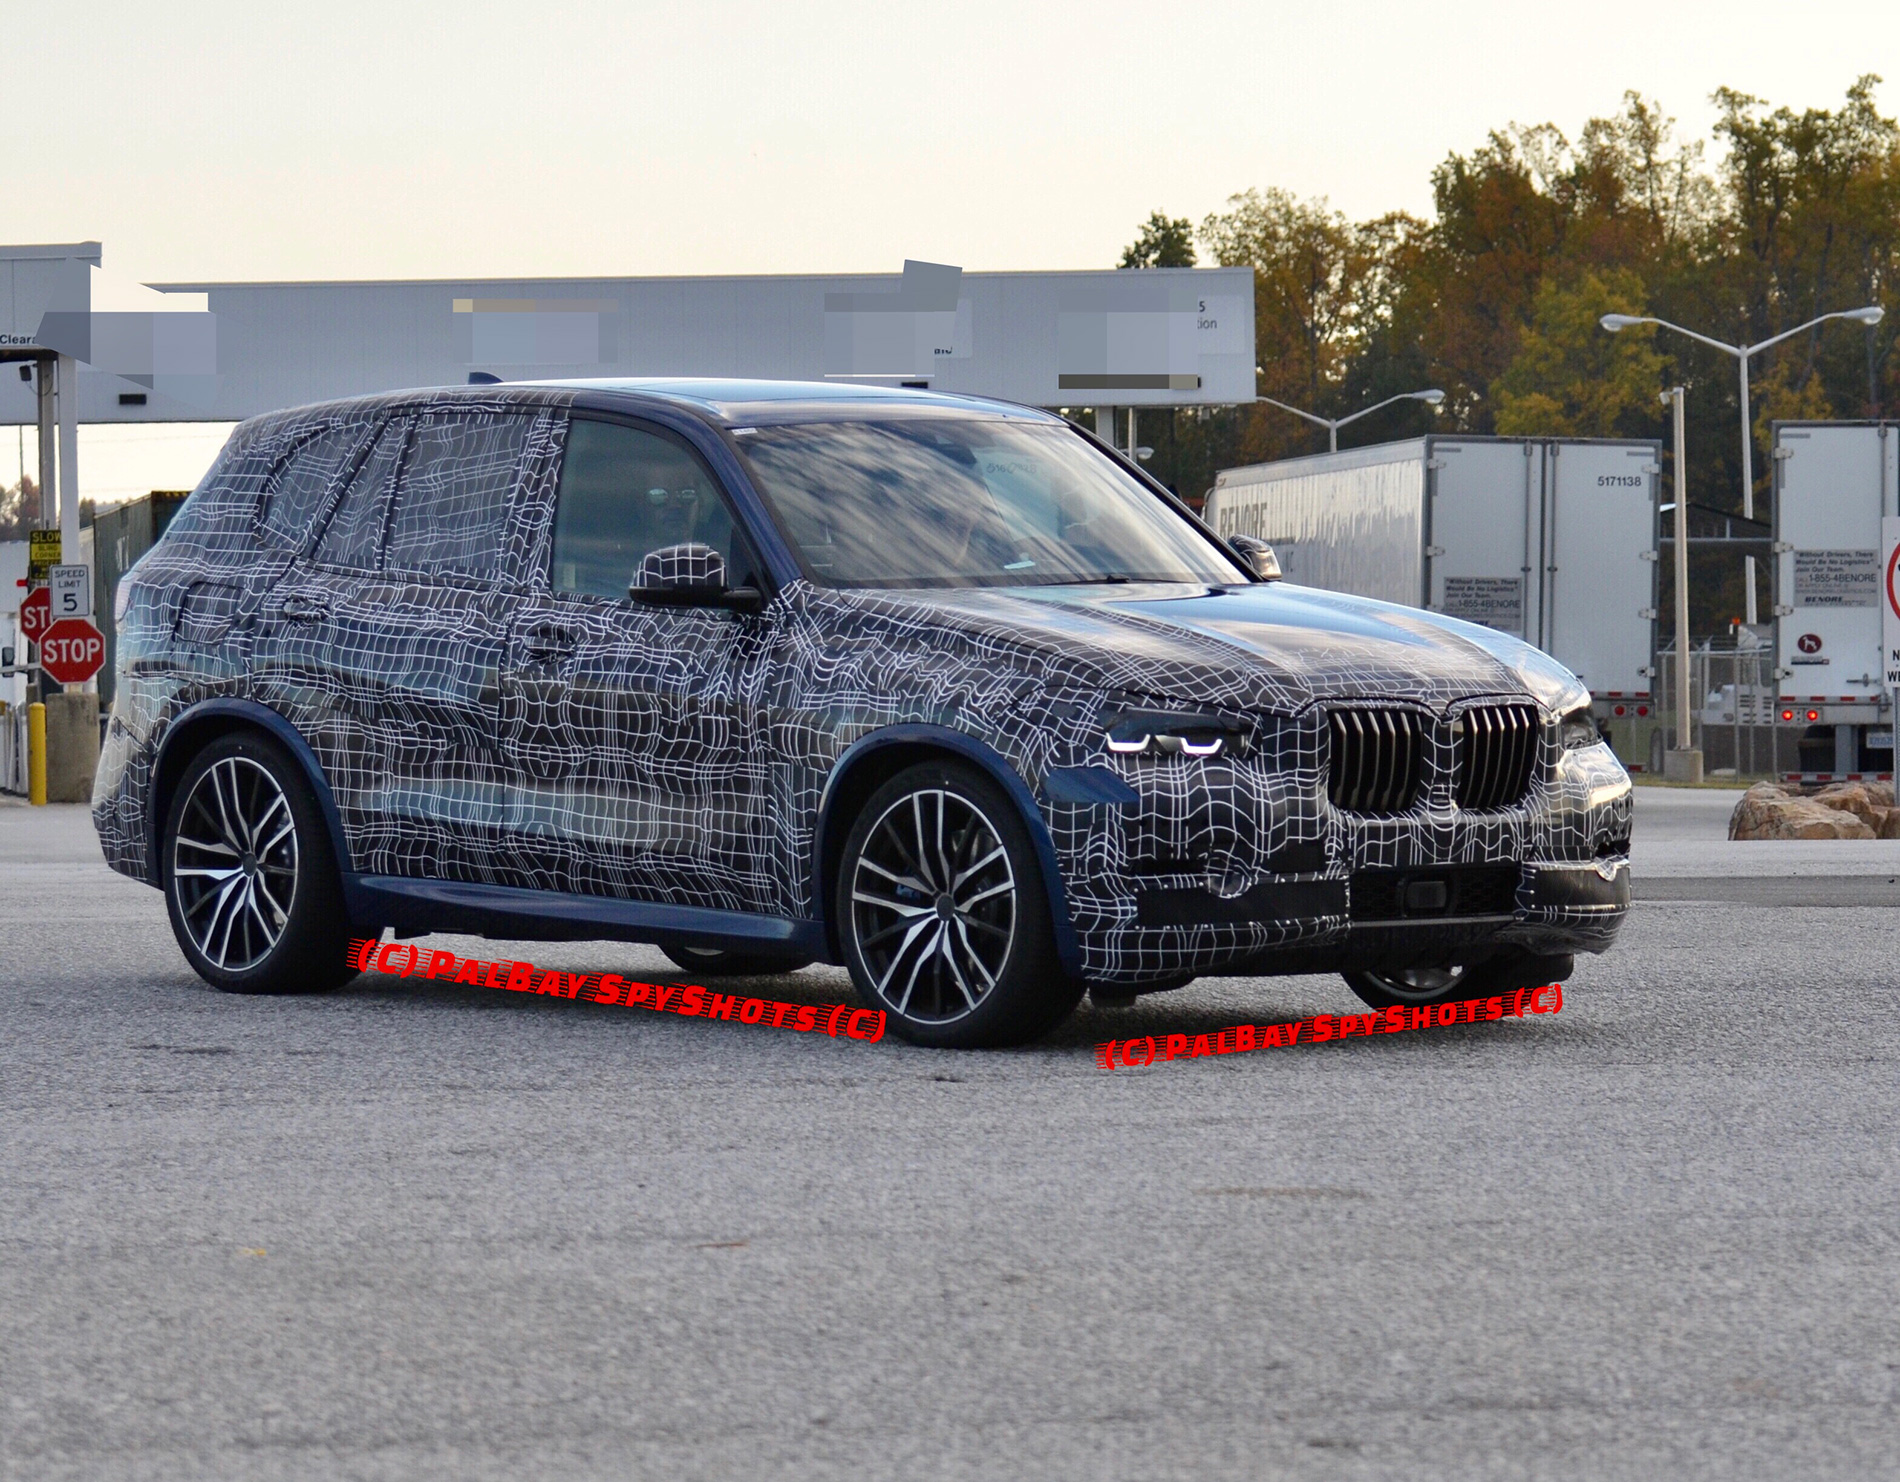 New BMW G05 X5 will be introduced in Summer 2018